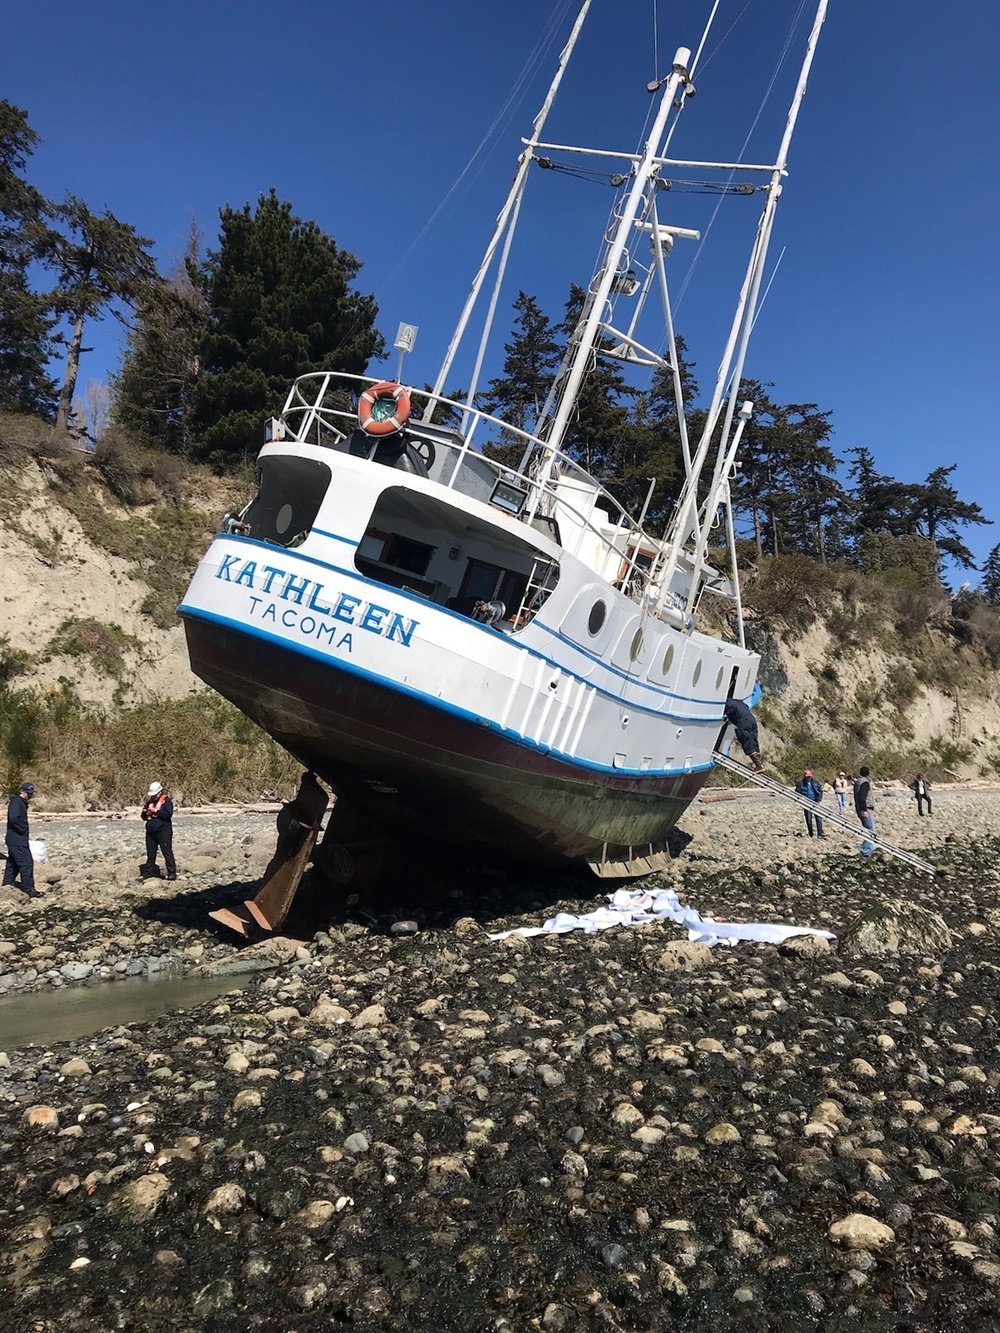 Coast Guard Sector Puget Sound personnel respond to grounded vessel